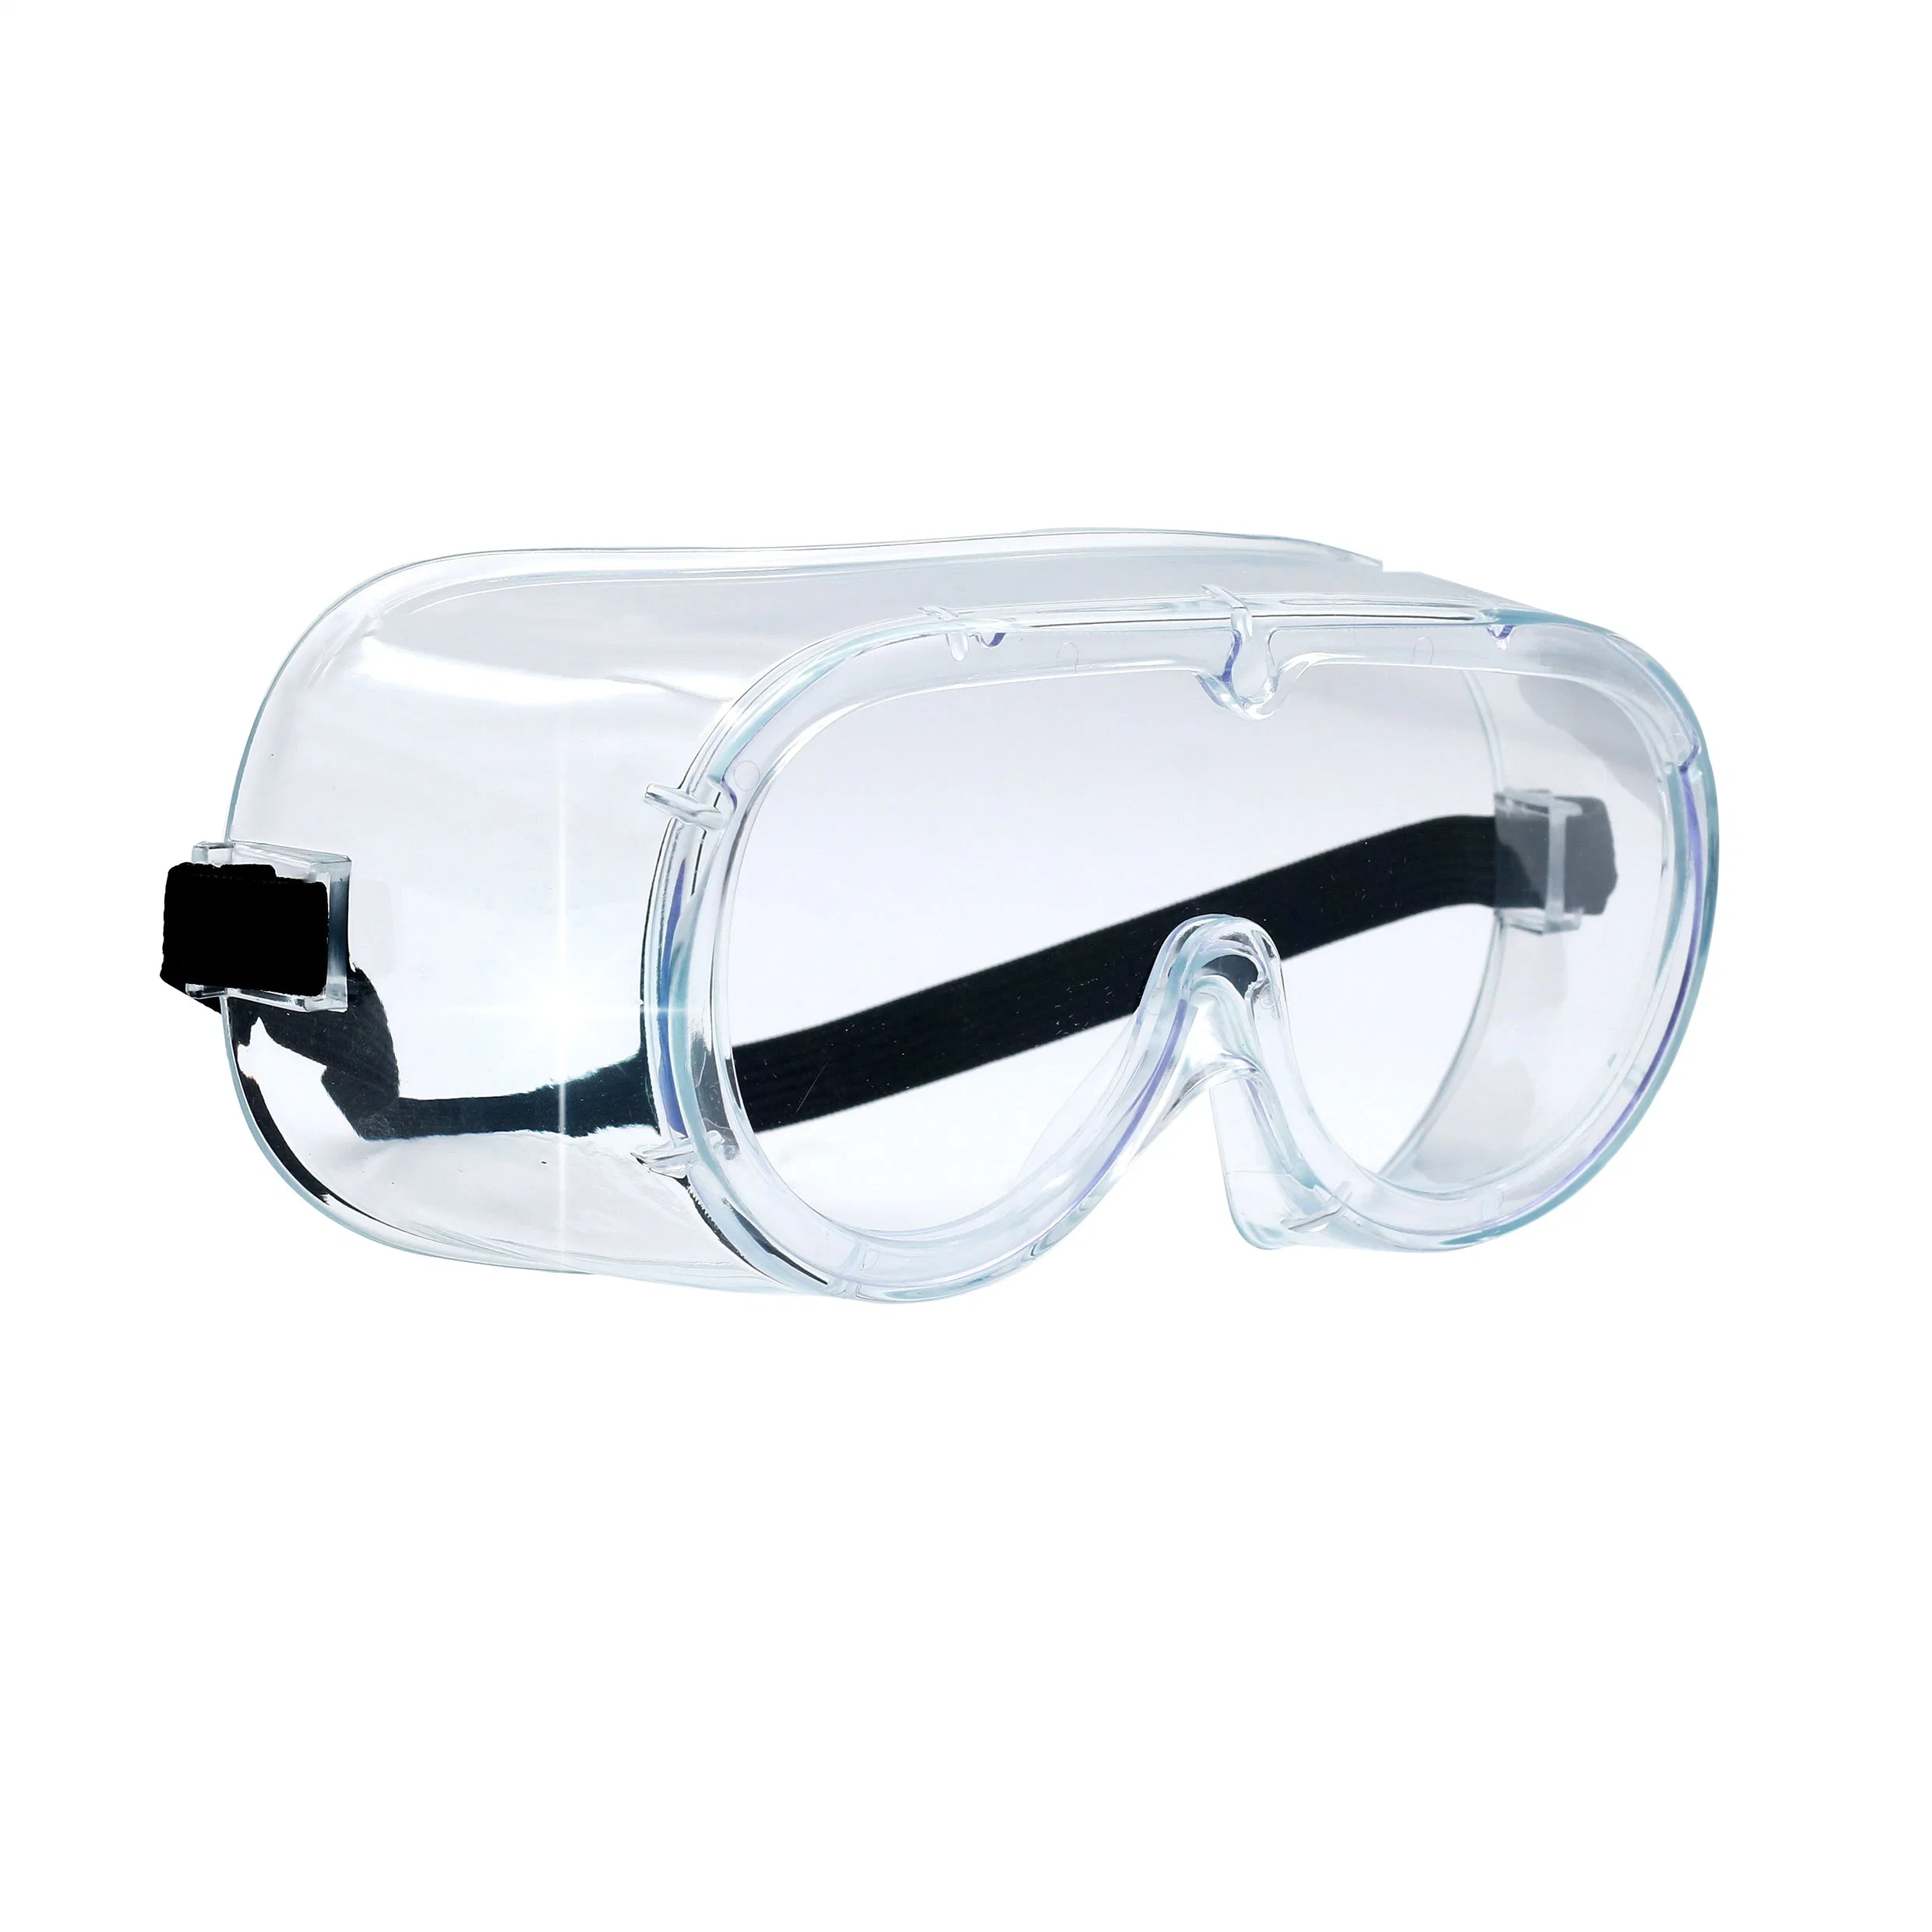 High Quality Multi-Function Multi-Purpose Medical Goggles